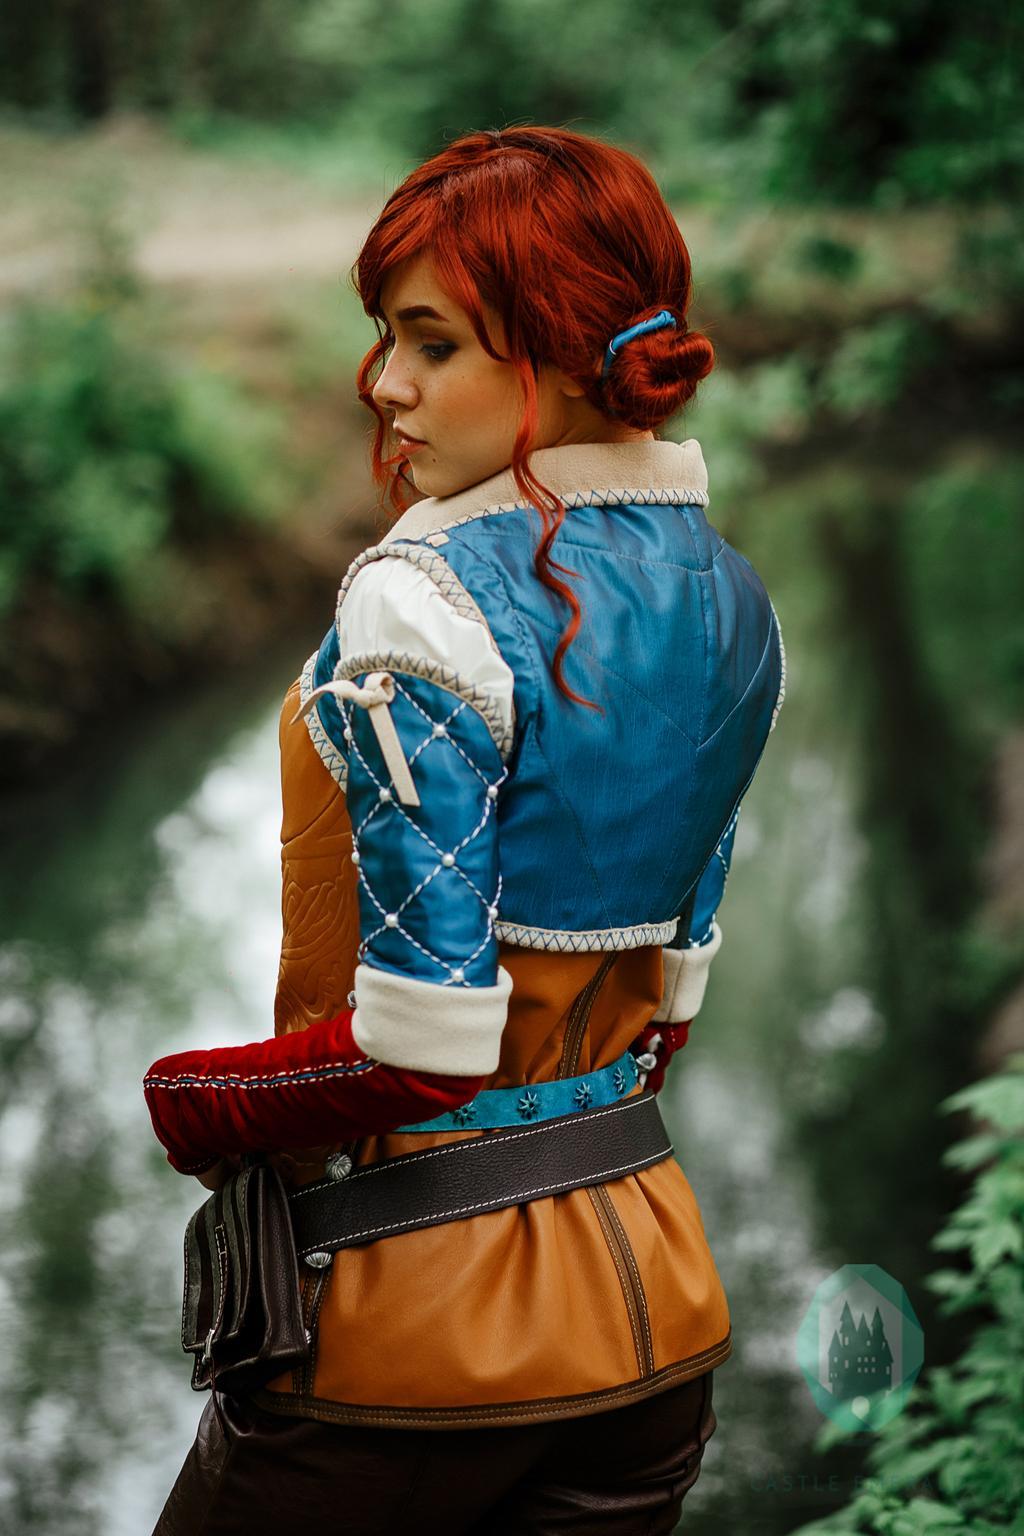 60+ Hot Pictures Of Triss Merigold From The Witcher Series Are Delight For Fans 87